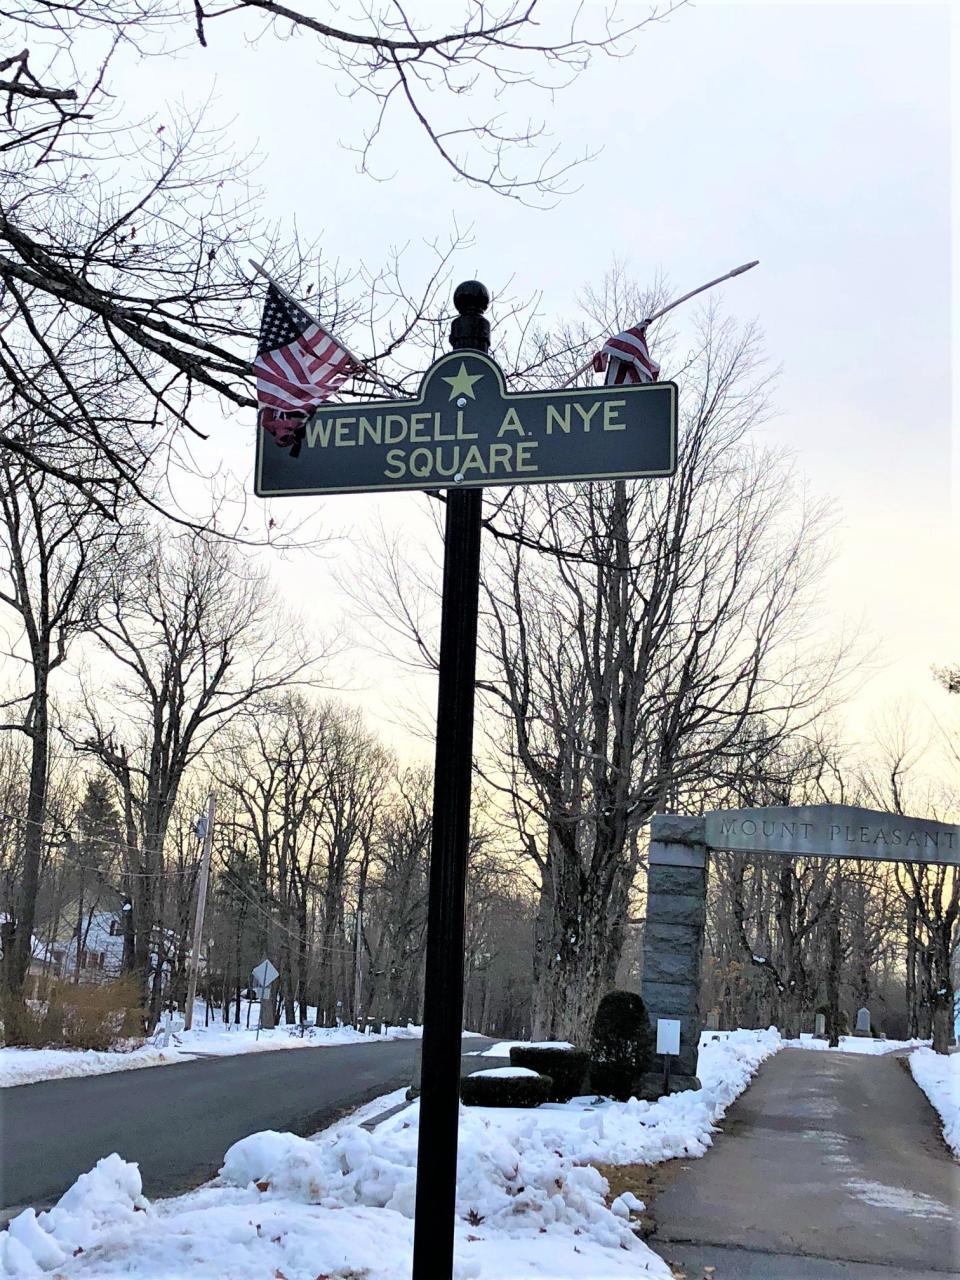 Wendell Nye Square is located at the intersection of Ellis and Knower roads, near the entrance to Mount Pleasant Cemetery in Westminster.